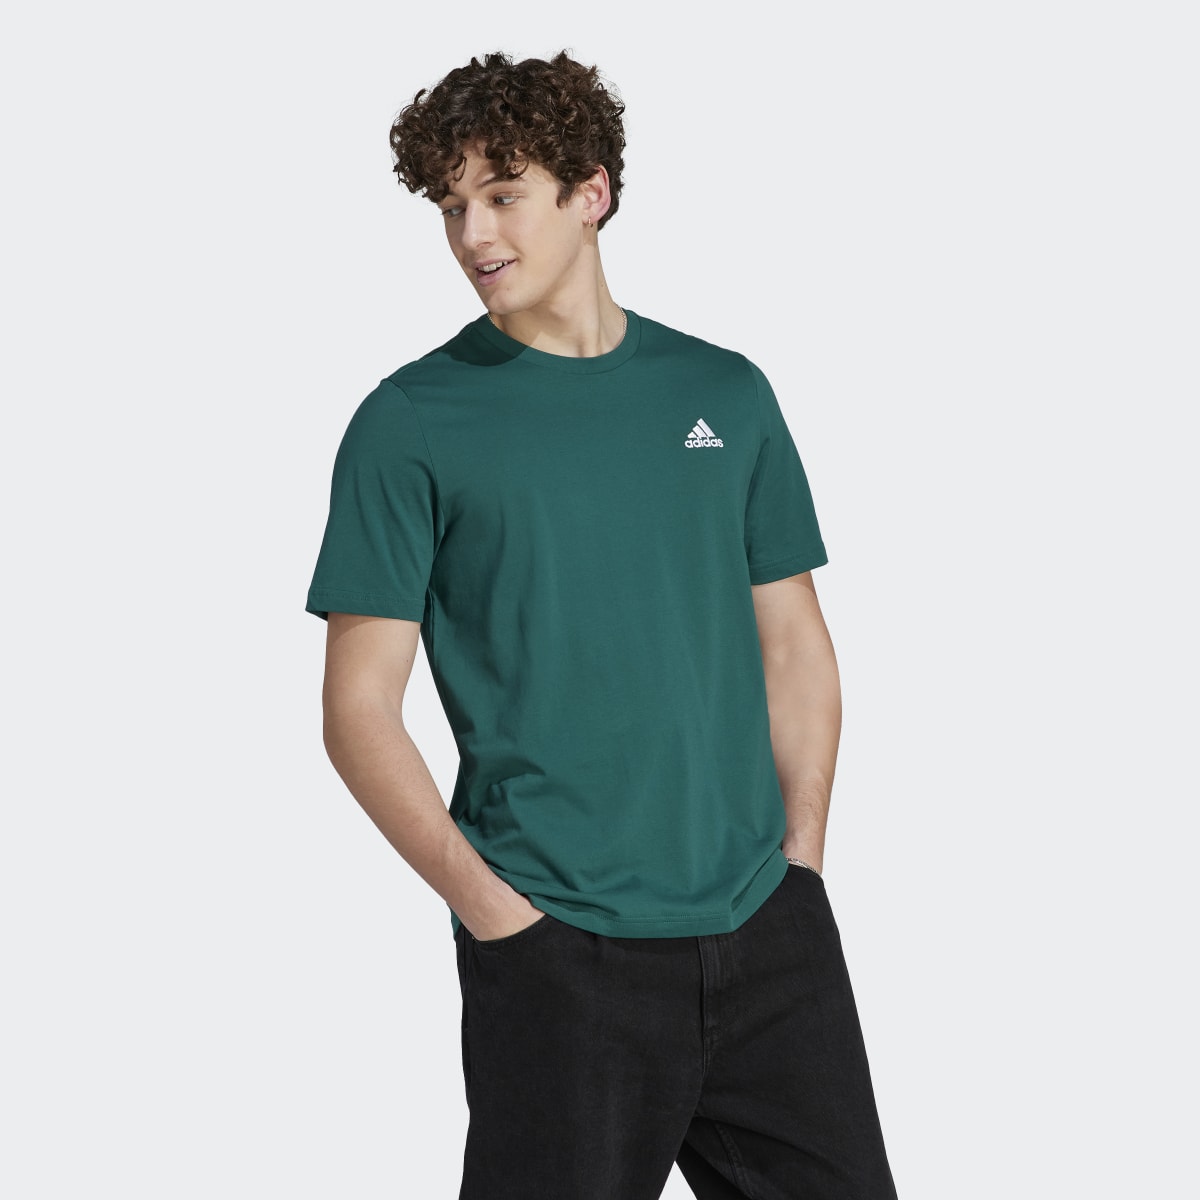 Adidas Essentials Single Jersey Embroidered Small Logo Tee. 4